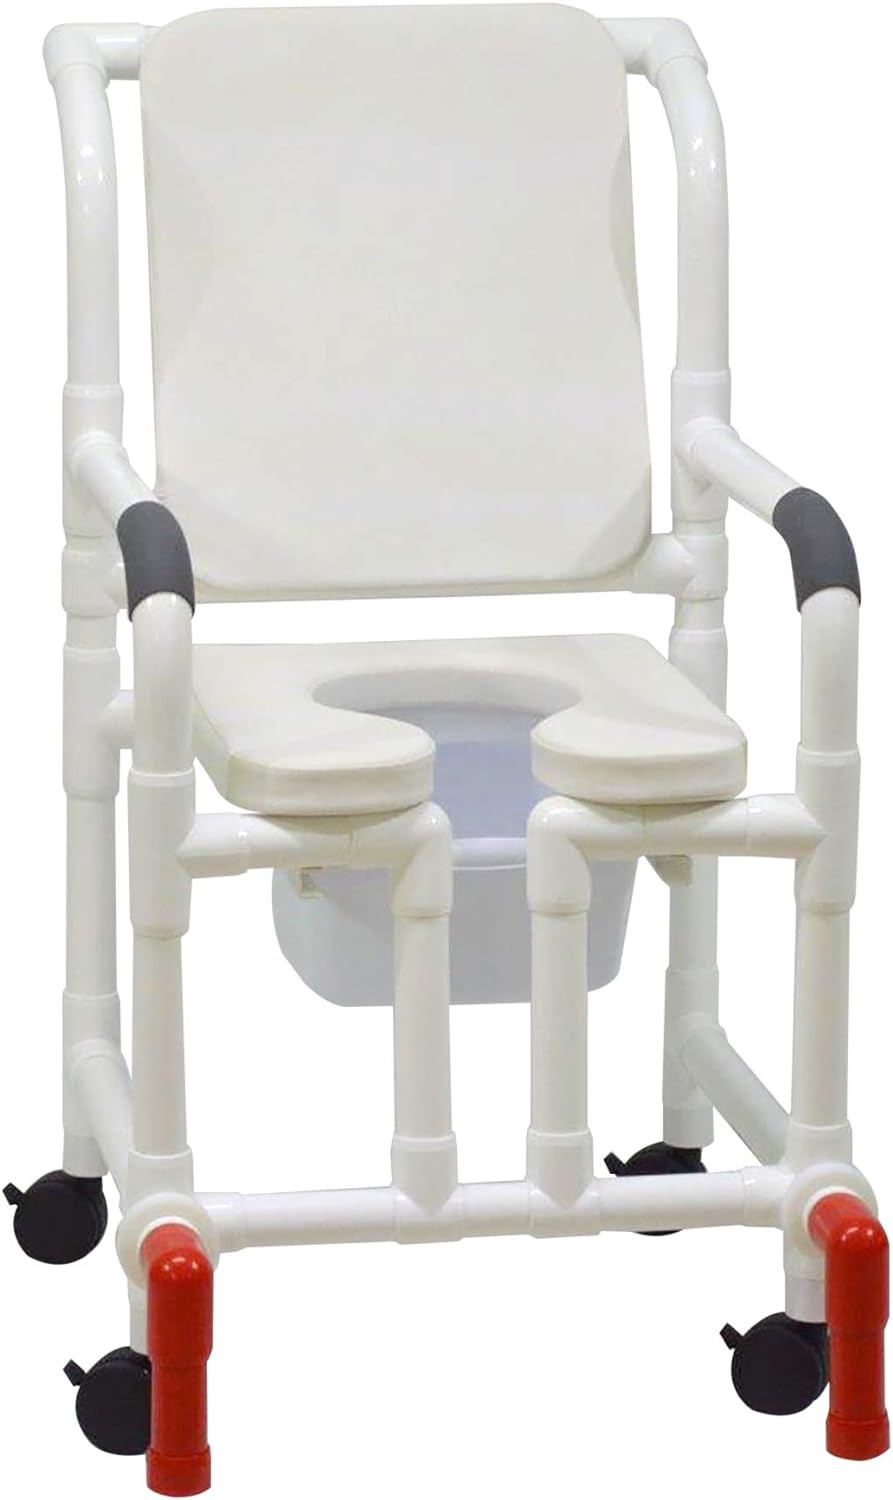 MJM International Corp. Shower chair 18Inch internal width 3Inch twin casters WHITE deluxe elongated open front soft seat WHITE cushion padded back true